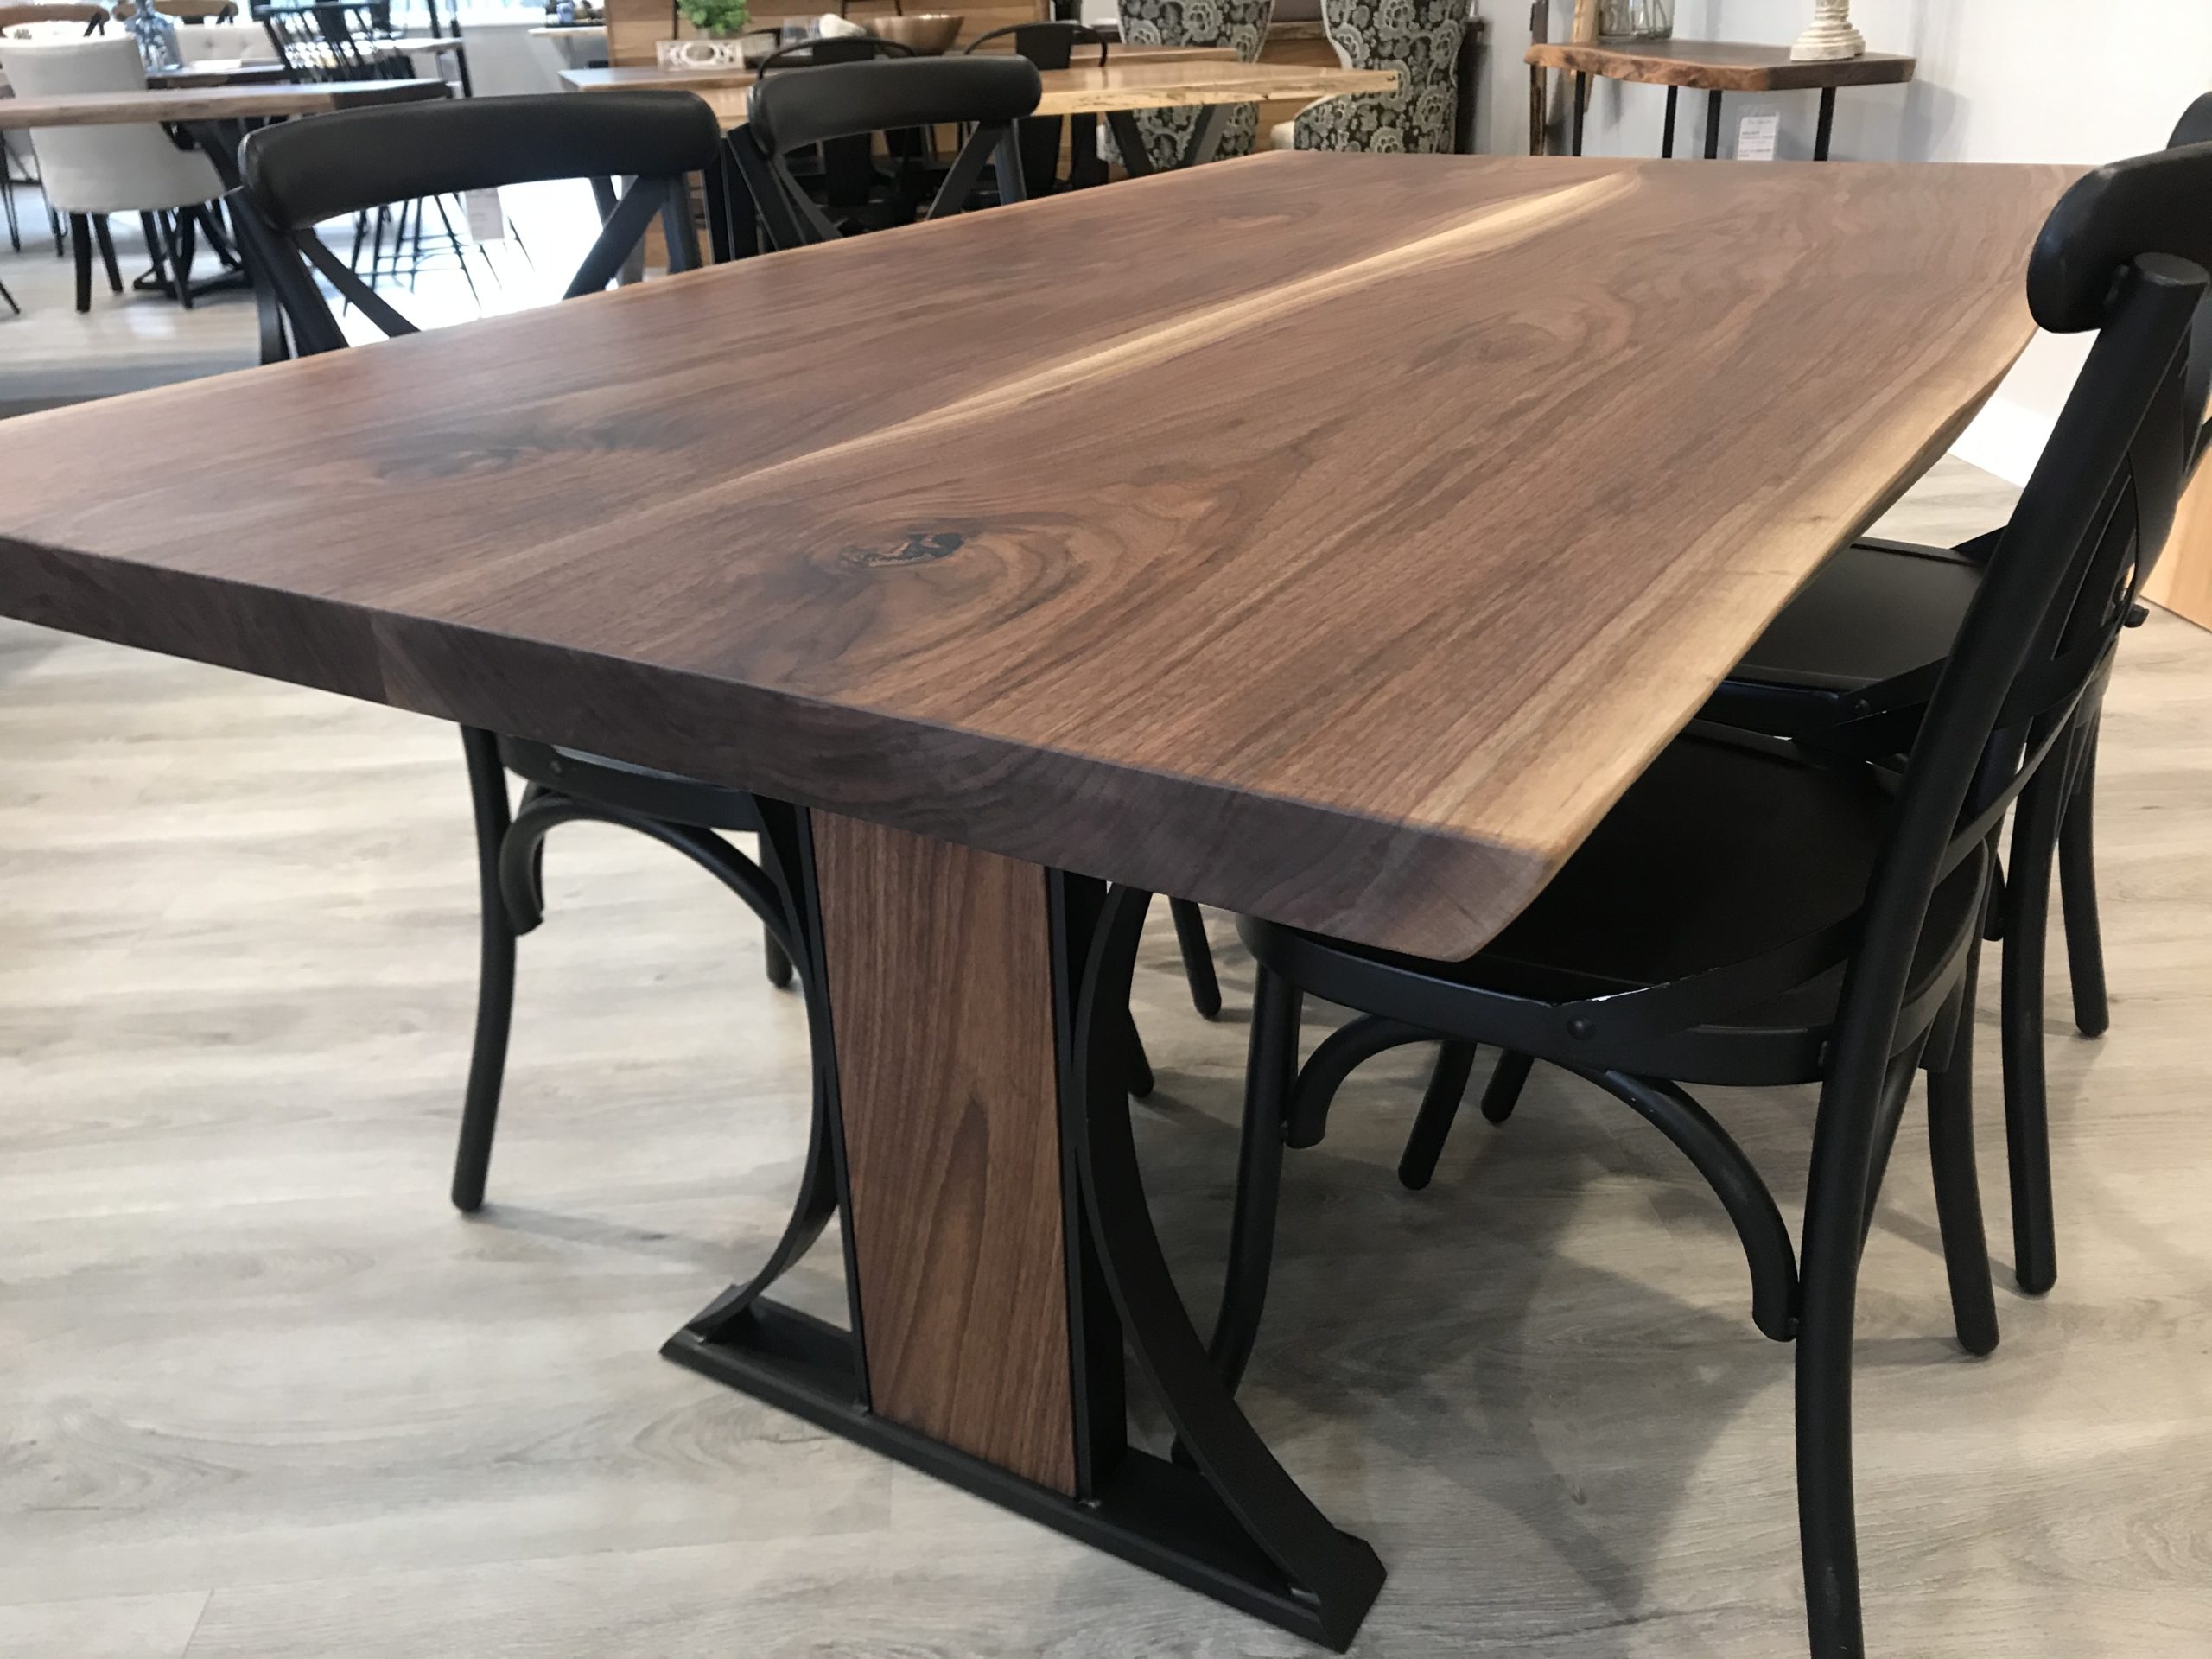 Crater Lake Live Edgewalnut Dining Table 6 Pathway Tables